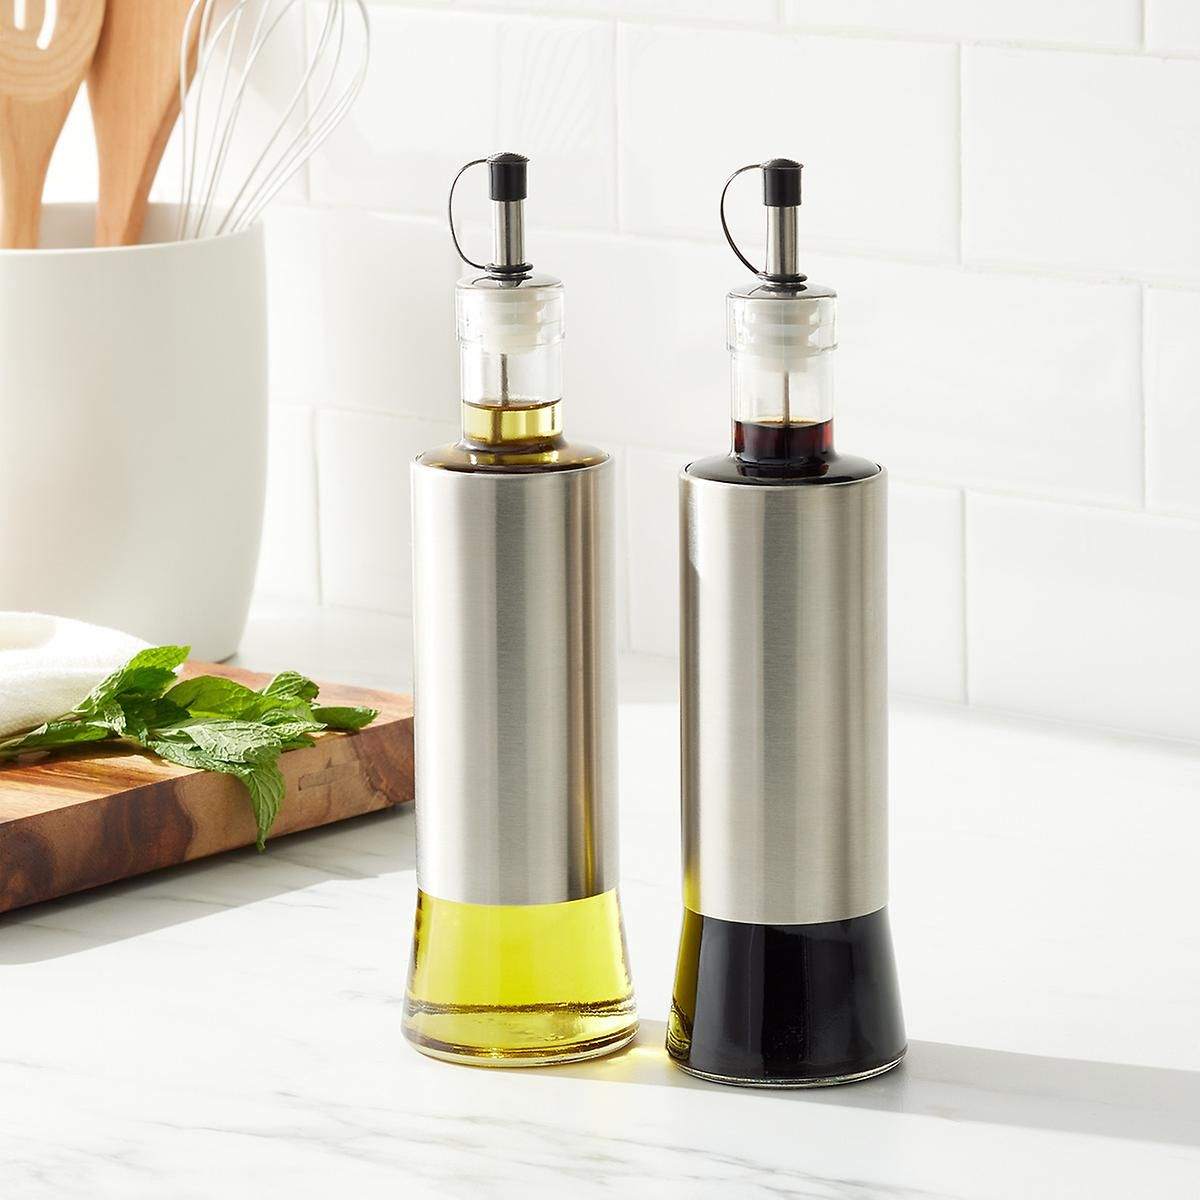 Trudeau Oil Bottles Set of 2 | The Container Store